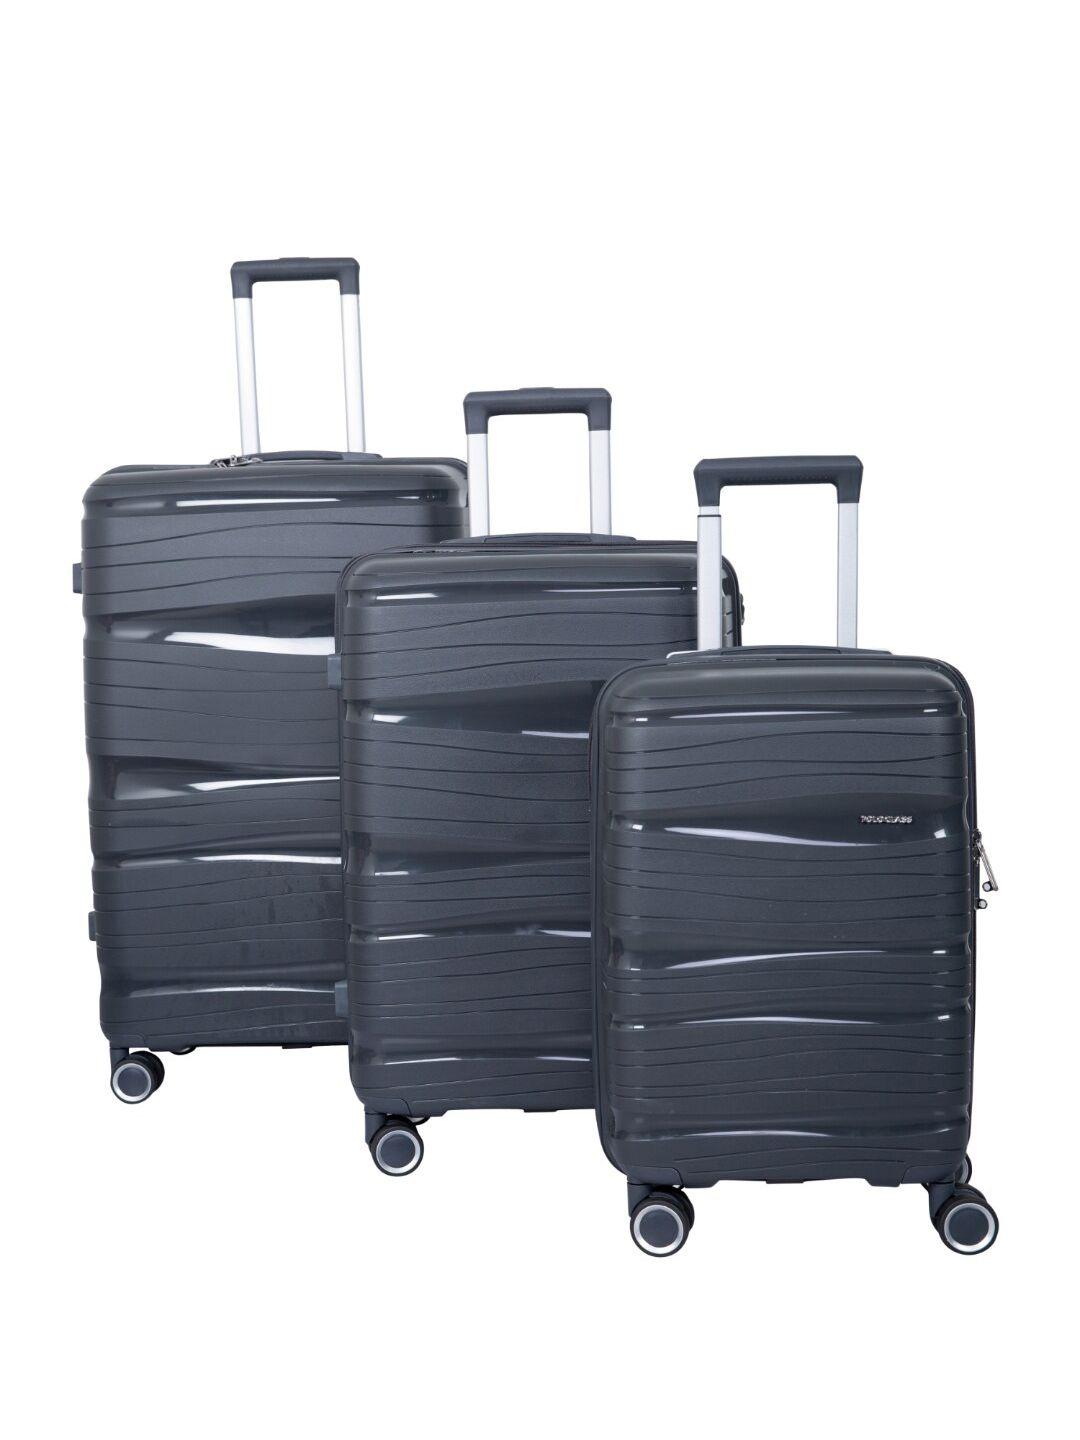 polo class set of 3 textured hard-sided large medium & cabin trolley suitcases-70.0l